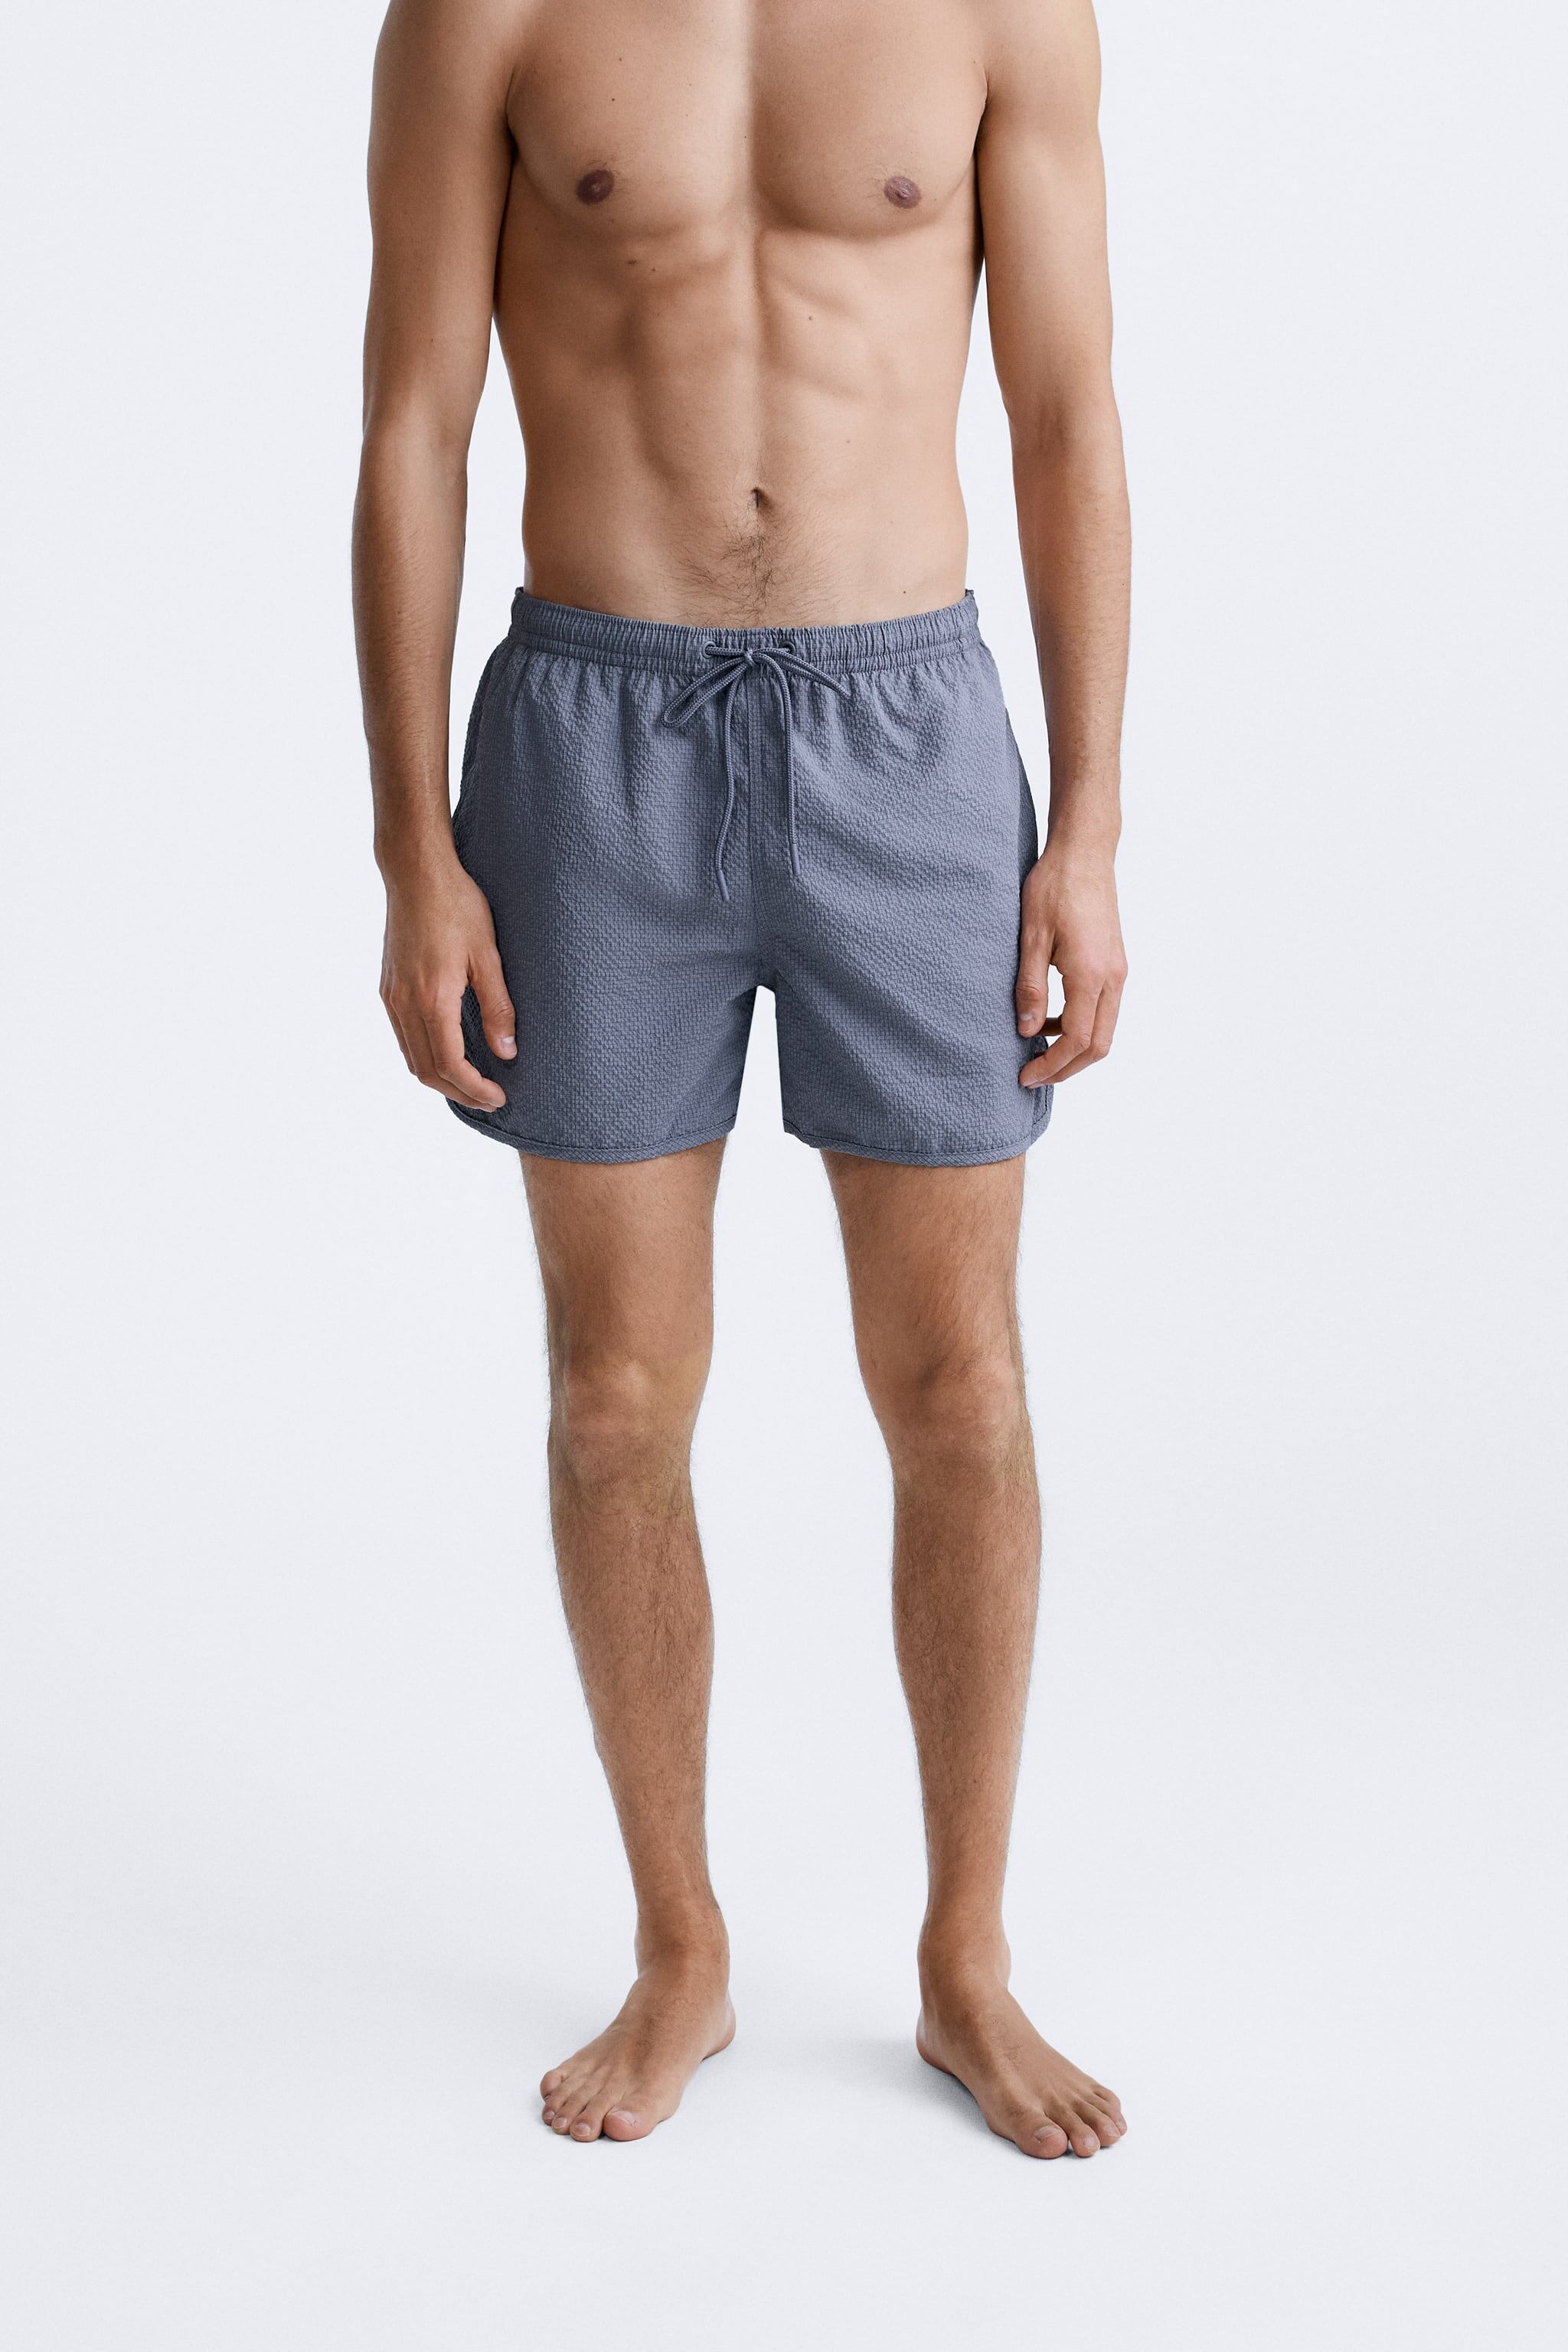 SQUARE TEXTURED SWIMMING TRUNKS